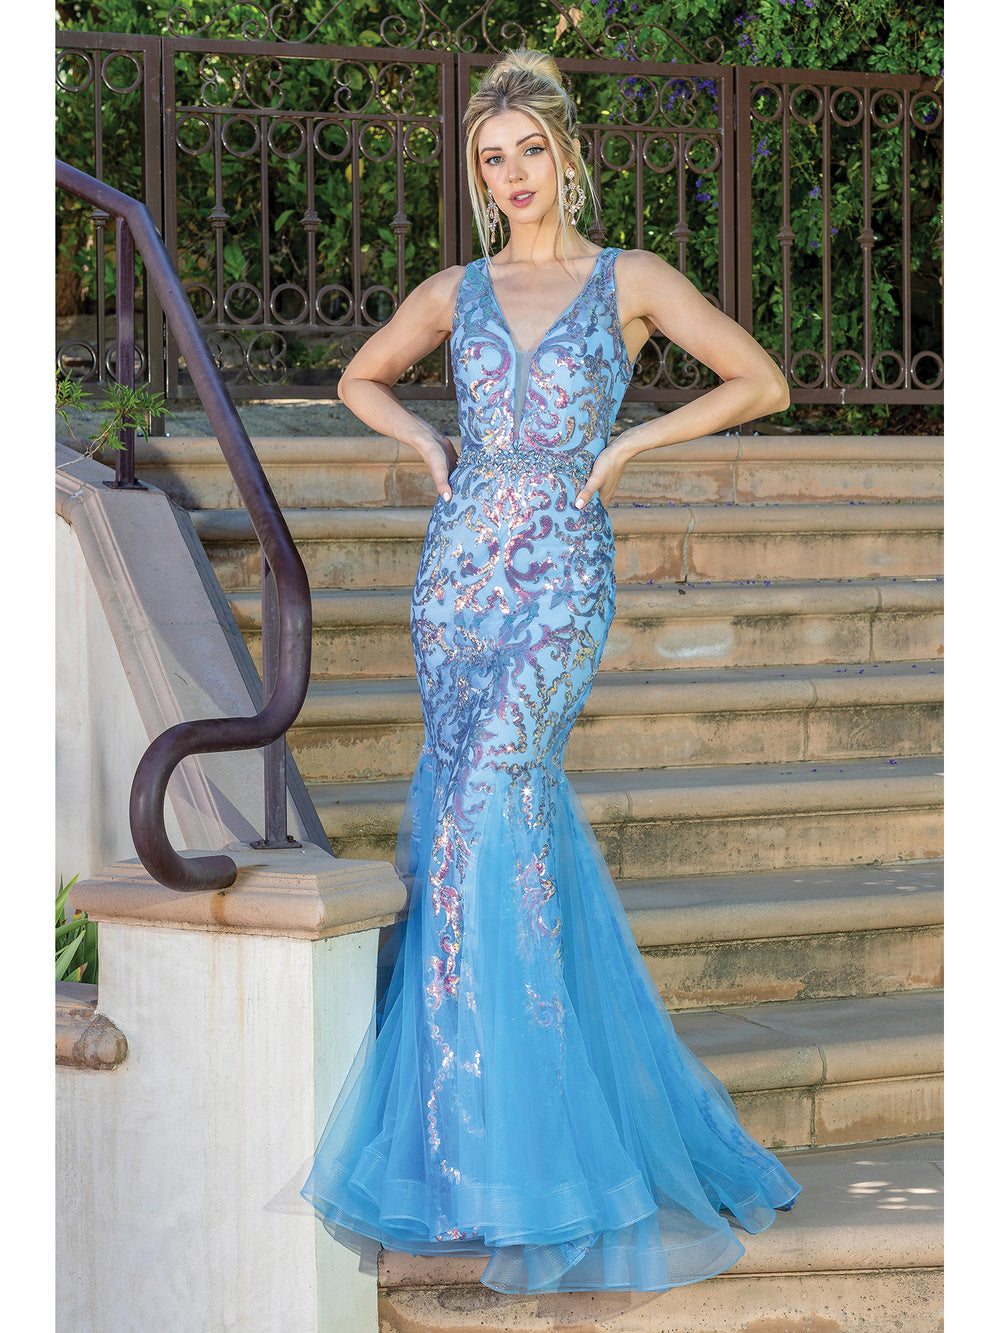 DQ 4213 Size 6 Turquoise Long Fitted Sequin Mermaid Prom Dress Pageant Gown Lush gusset tulle mermaid skirt with sequin lace accents. deep v neckline  Available Size: 6  Available Color: Turquoise